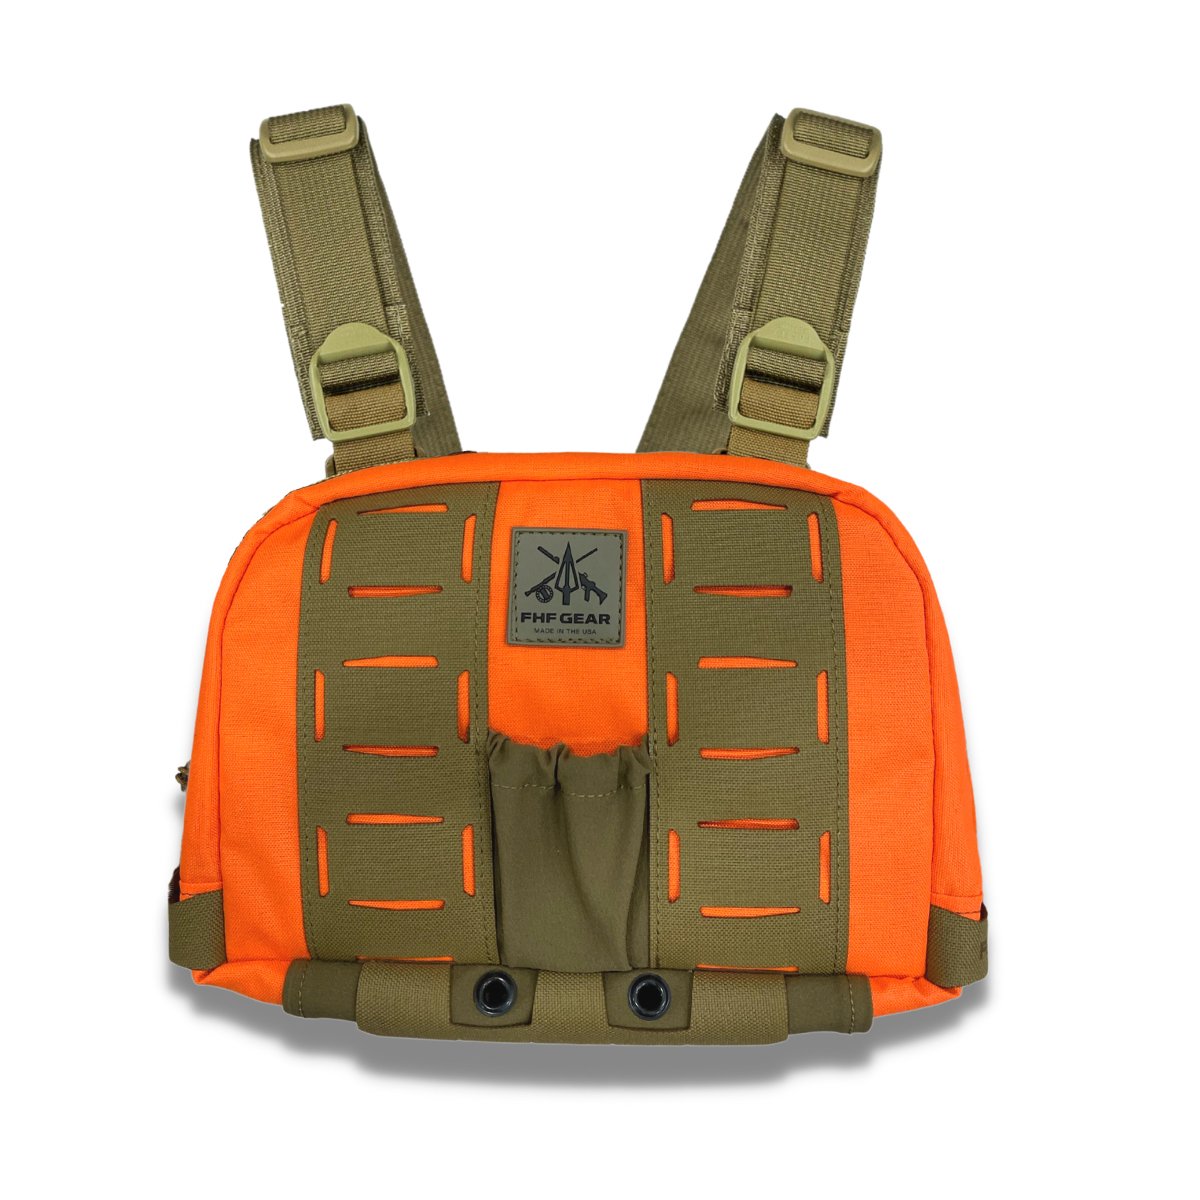 Black Chest Rig Tactical Gear Chest Pack Tactical Bag 